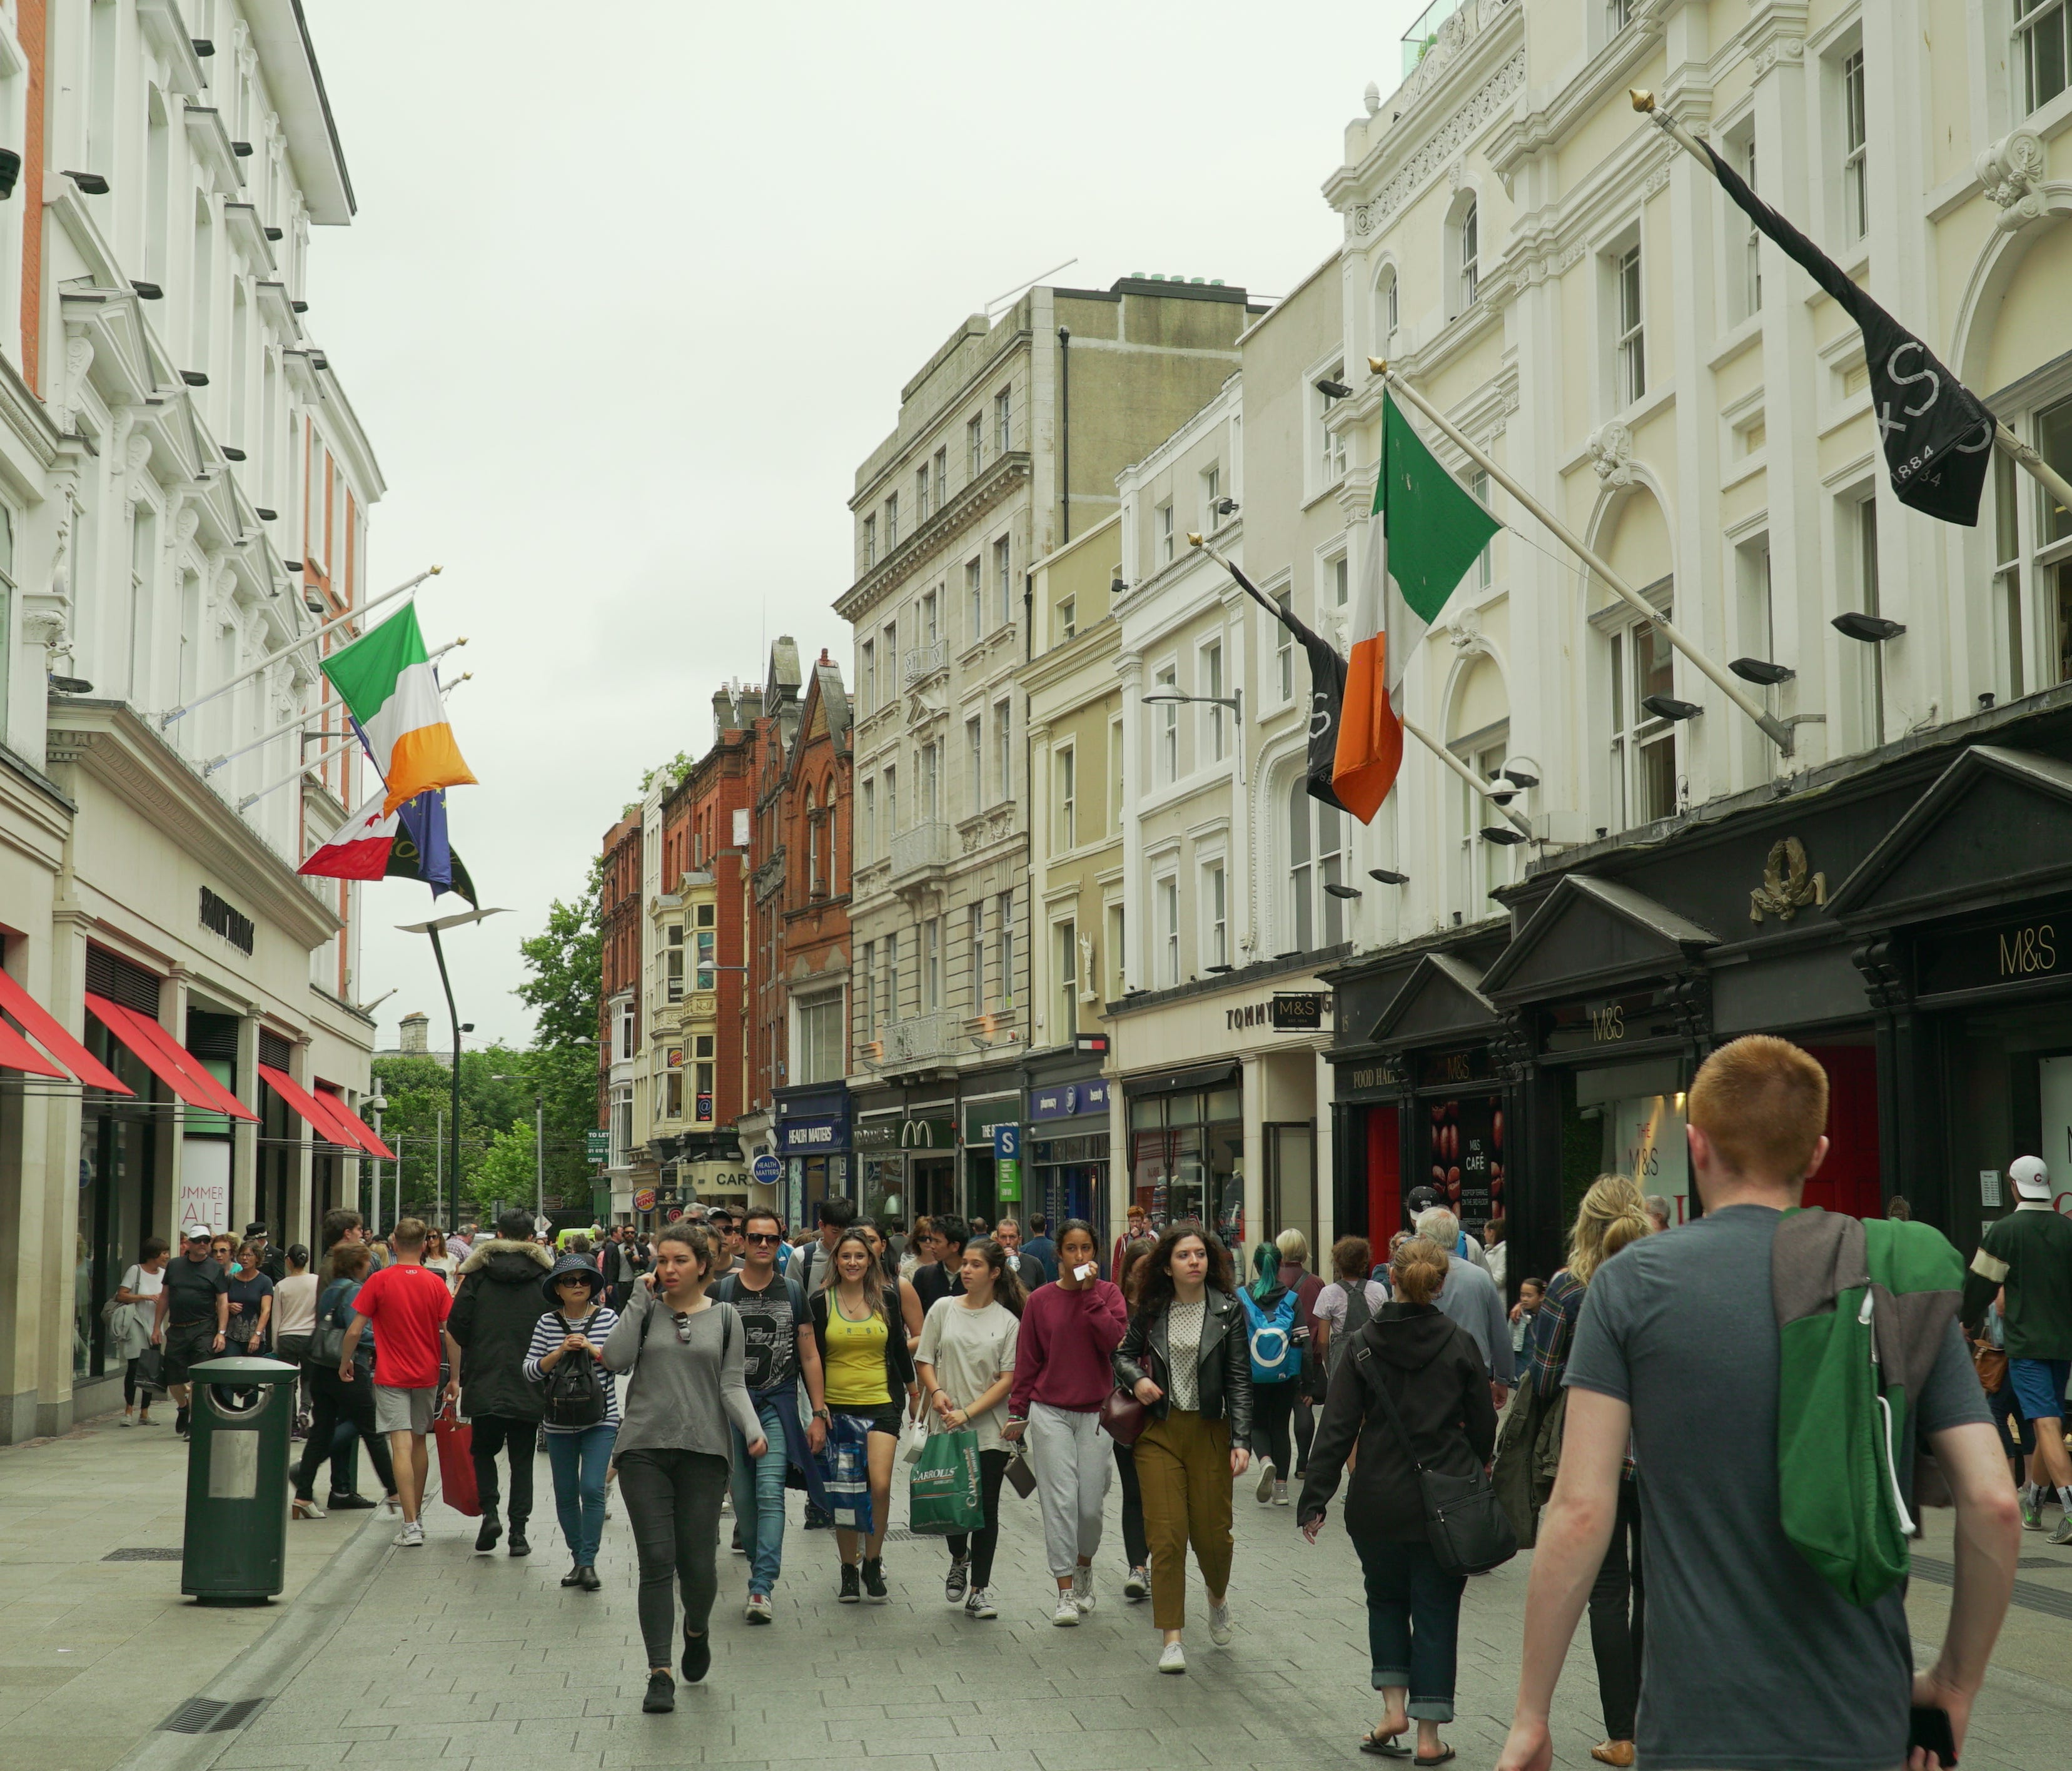 Dublin's Grafton Street, constructed in 1708, one of the most expensive shopping streets in the world.